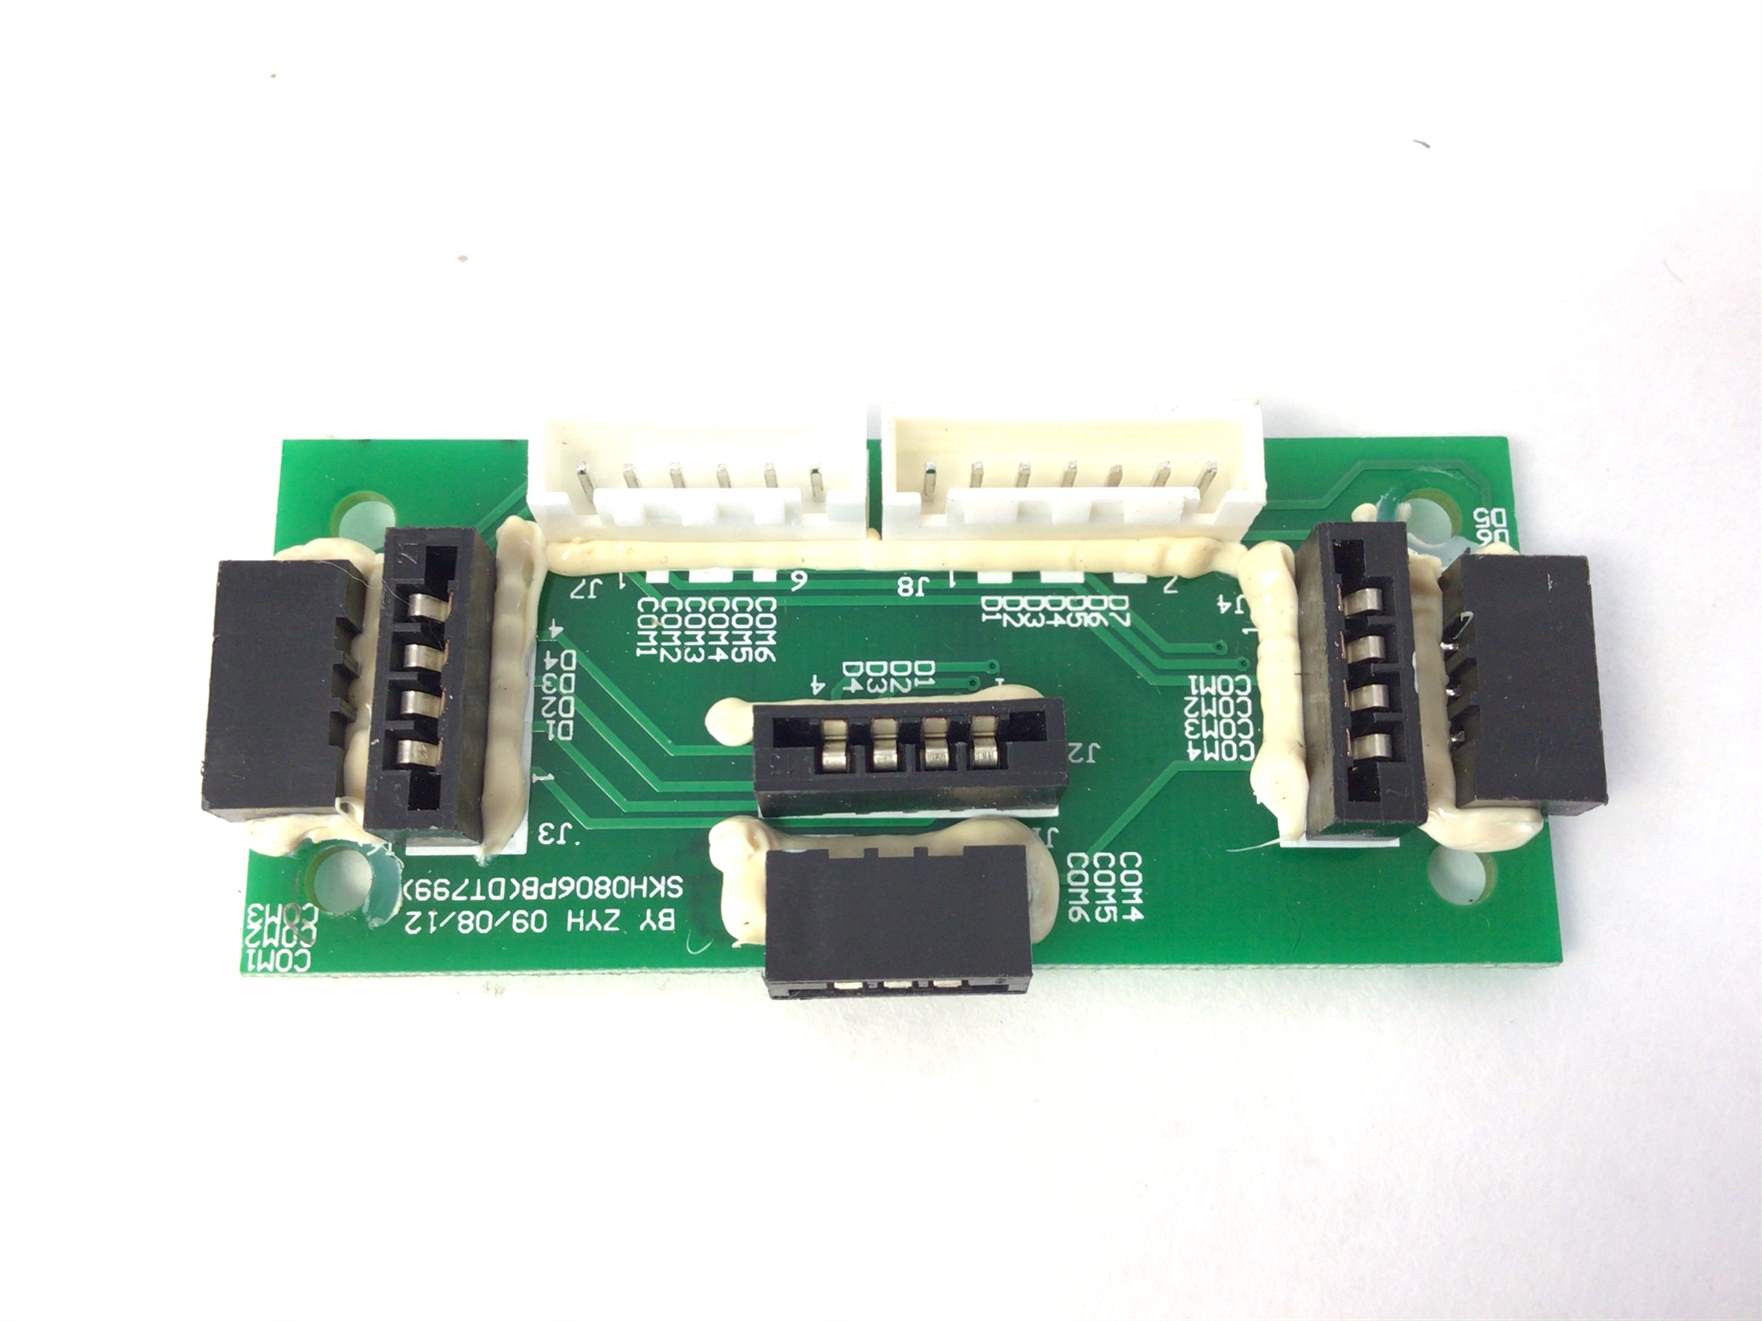 Console Interface Board - Used